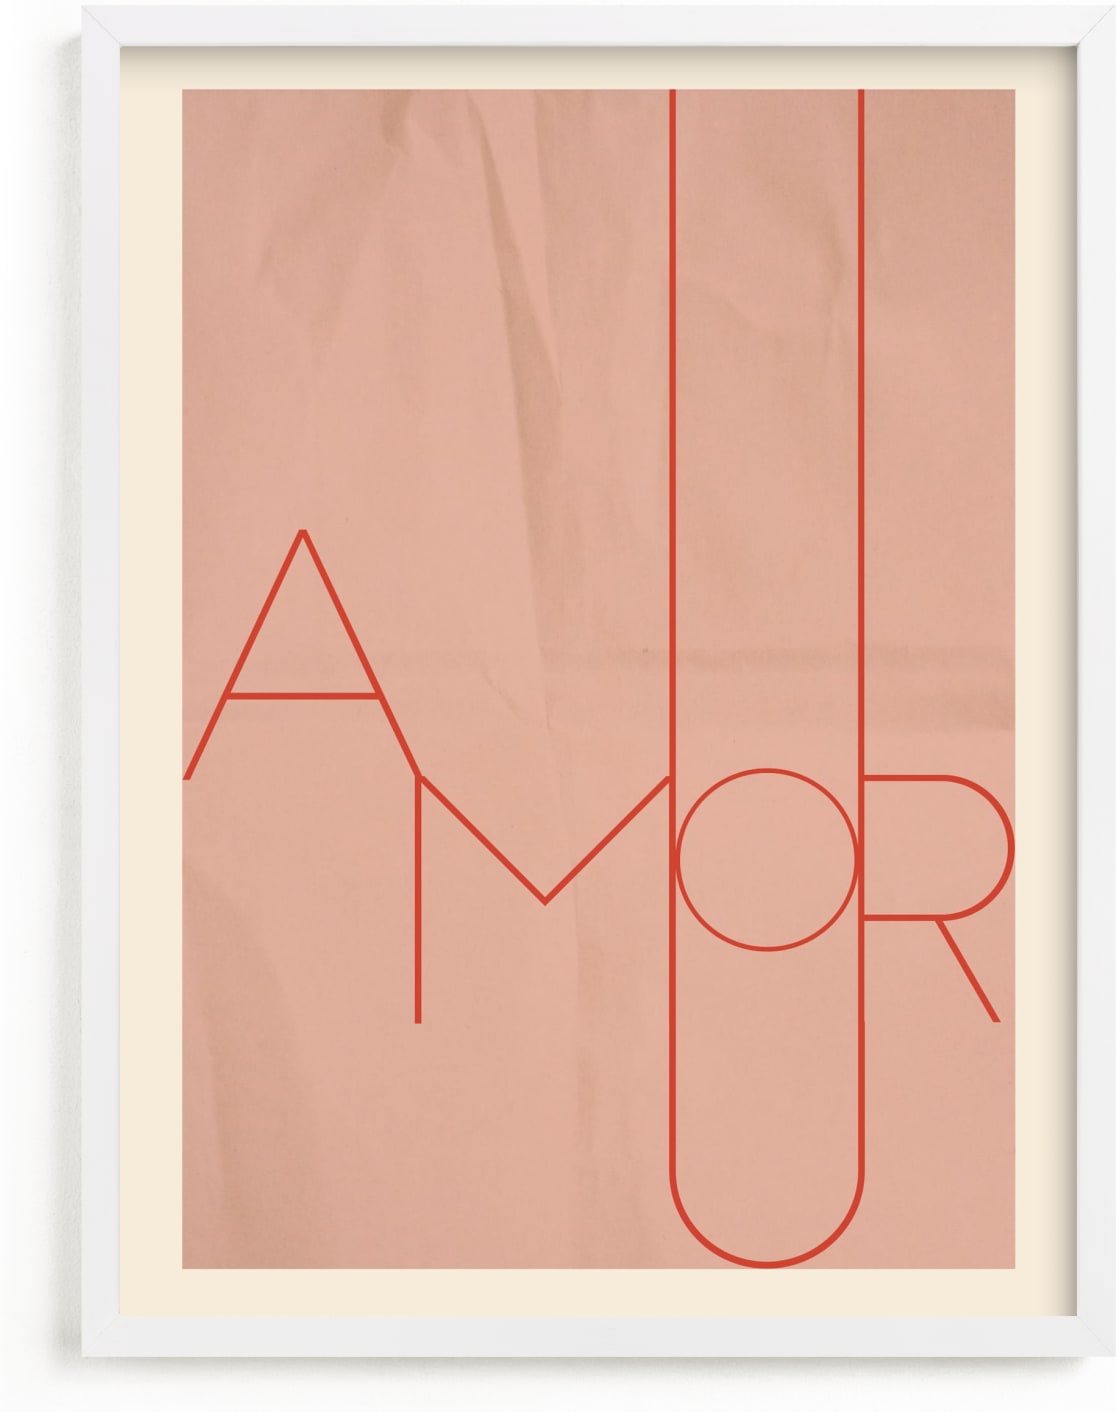 This is a ivory, pink, red art by Morgan Kendall called Amour.